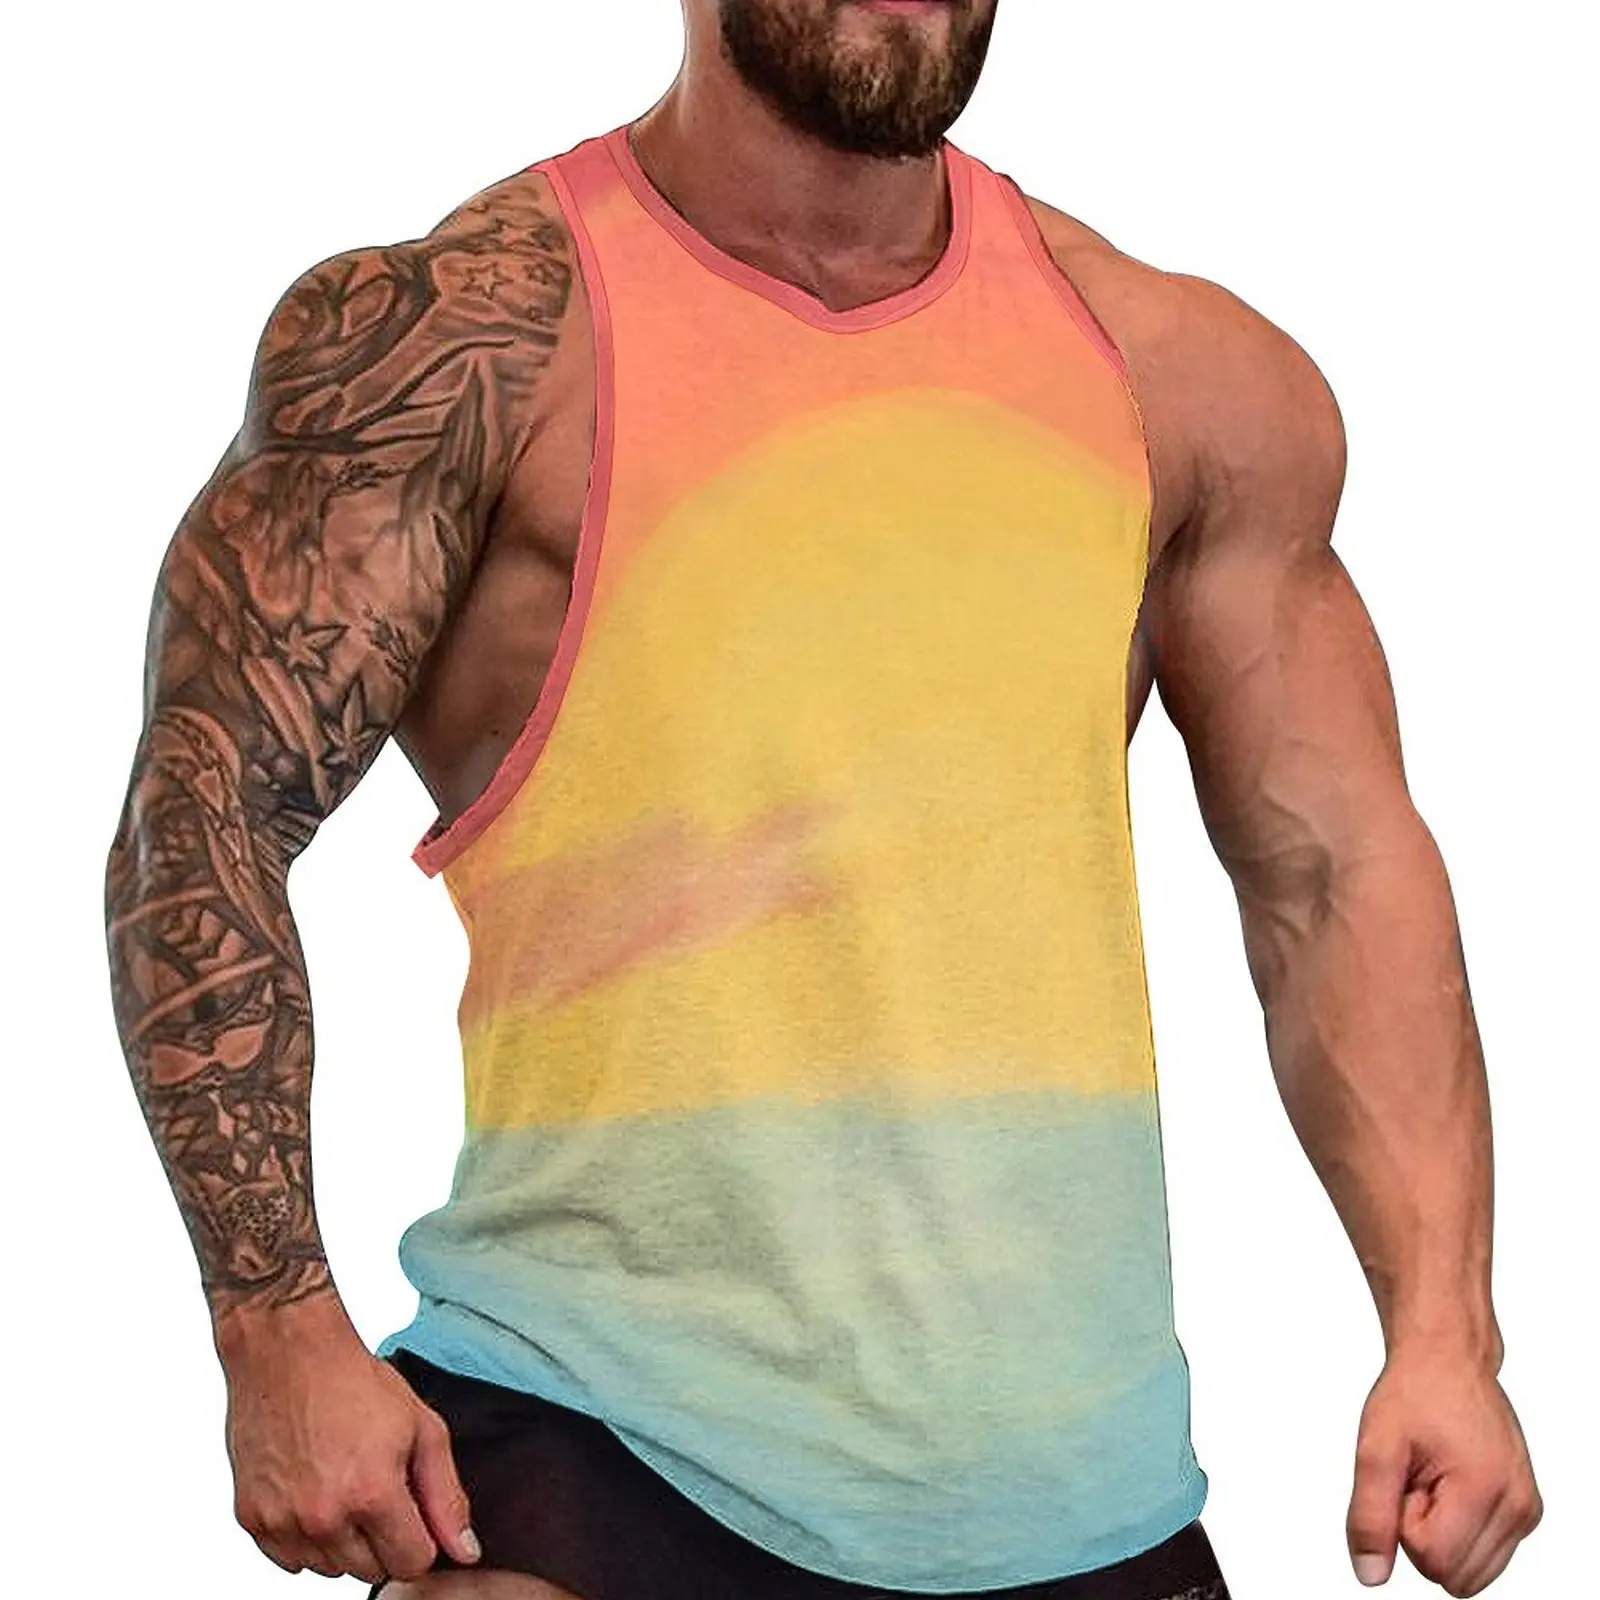 

Sunset Print Tank Top Males Subtle Pan Flag Sportswear Tops Summer Bodybuilding Graphic Sleeveless Vests Plus Size